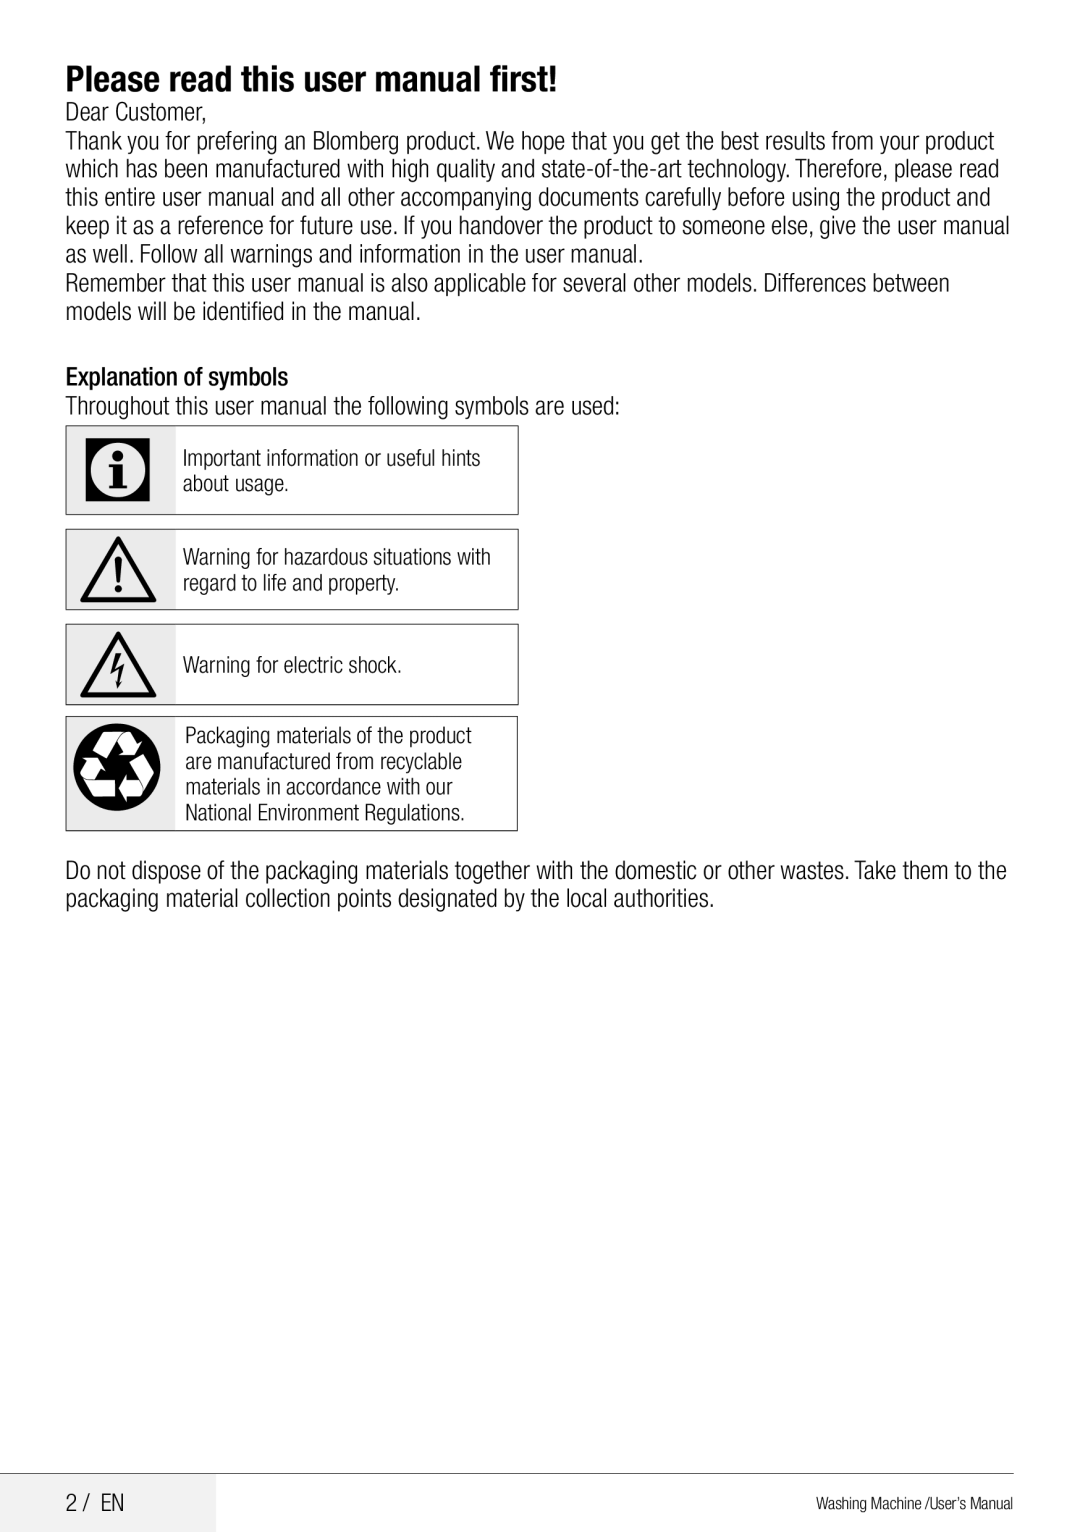 Blomberg WNF 8441 AE20 Please read this user manual first, Dear Customer, Explanation of symbols, 2 / EN 